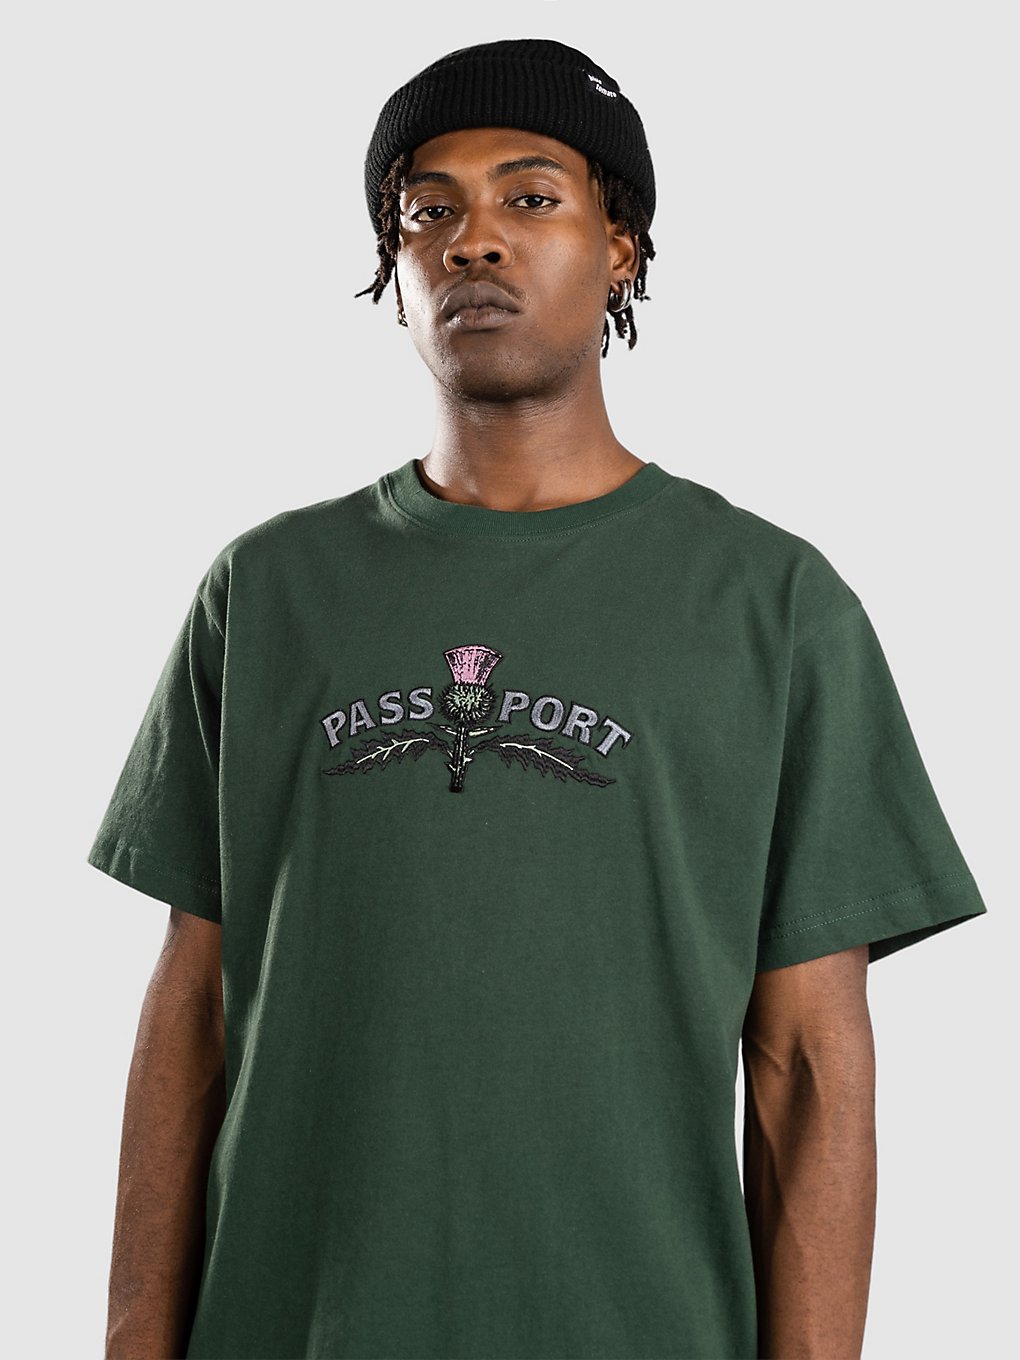 Pass Port Thistle Embroidery T-Shirt groen